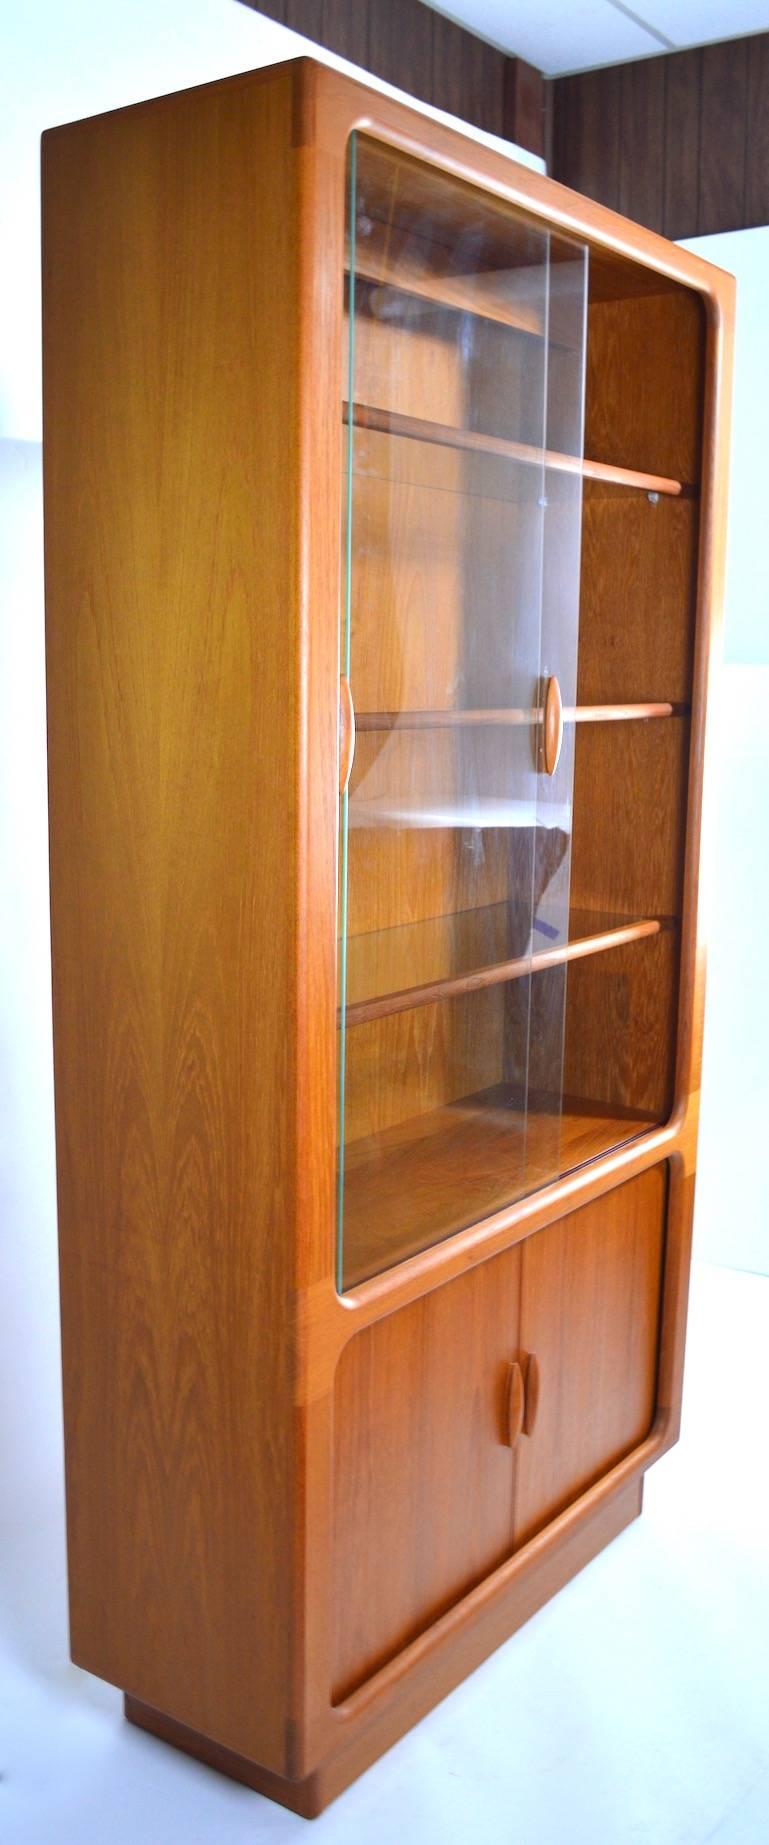 Dyrlund china cabinet, vitrine, with tambour roll doors at base, sliding glass doors, and adjustable wood trim glass shelves. This great display case features an interior light to highlight the items on the shelves. Great original condition, clean,